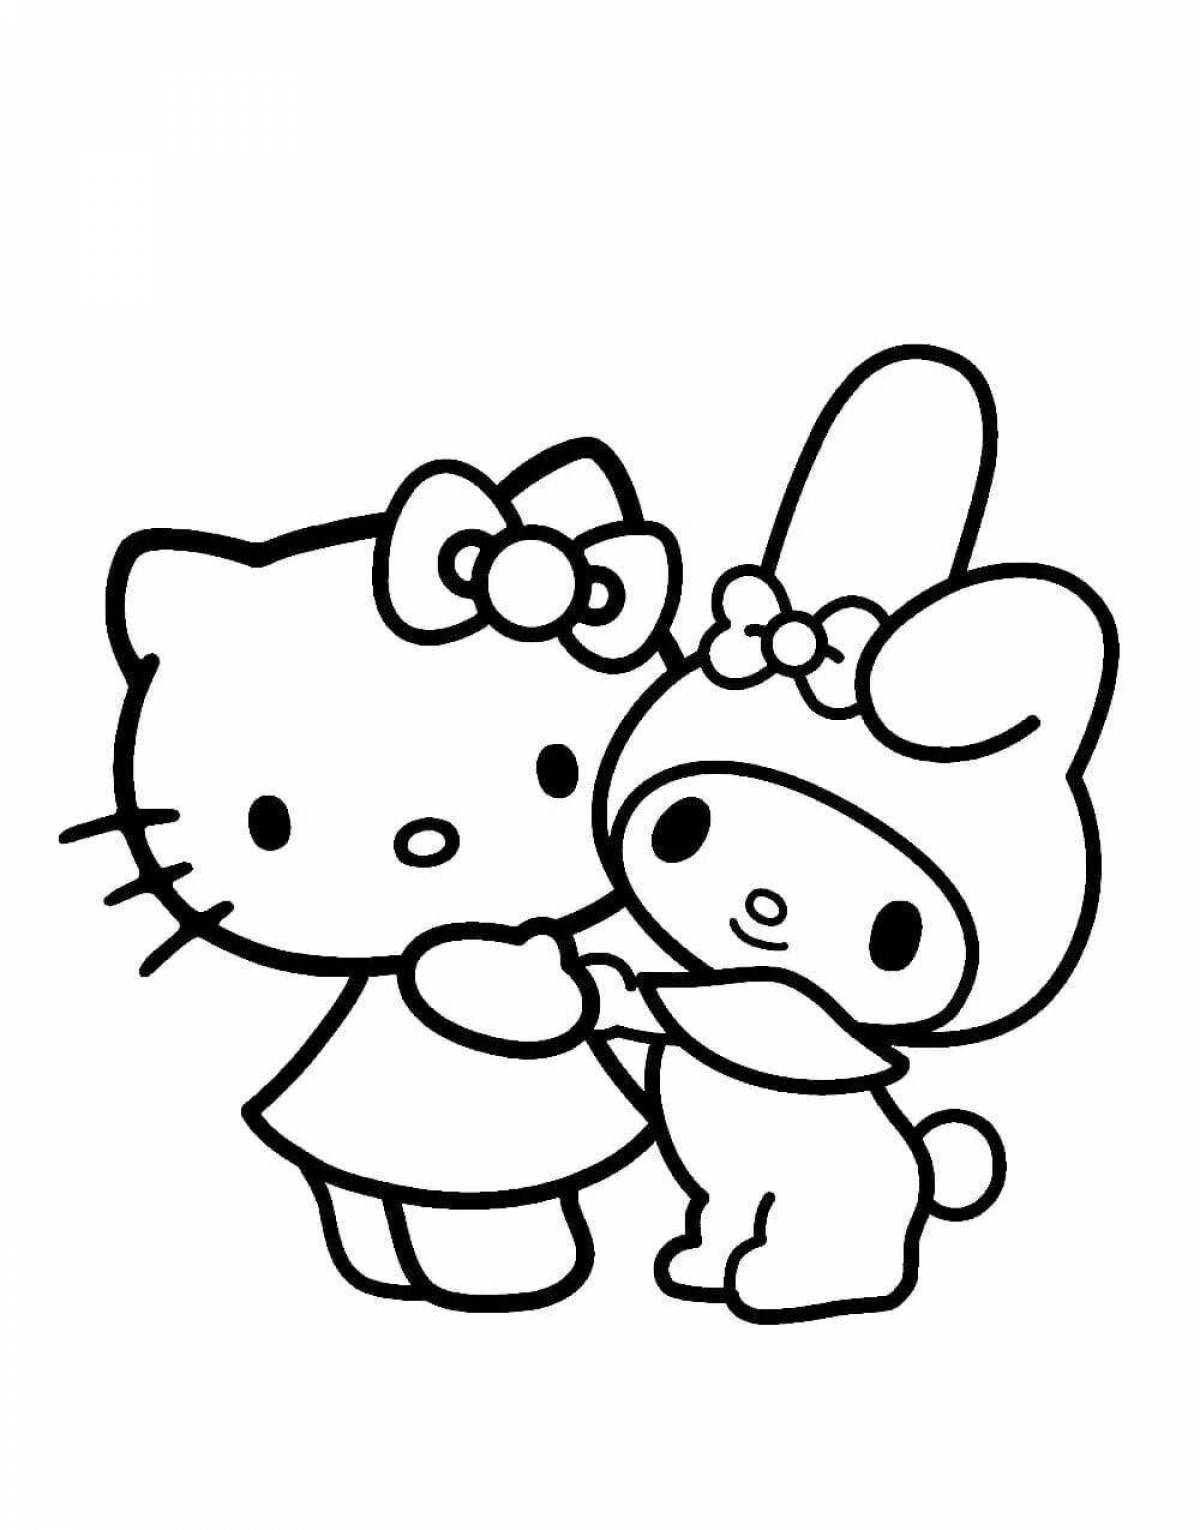 Adorable chicks and hello kitty coloring book